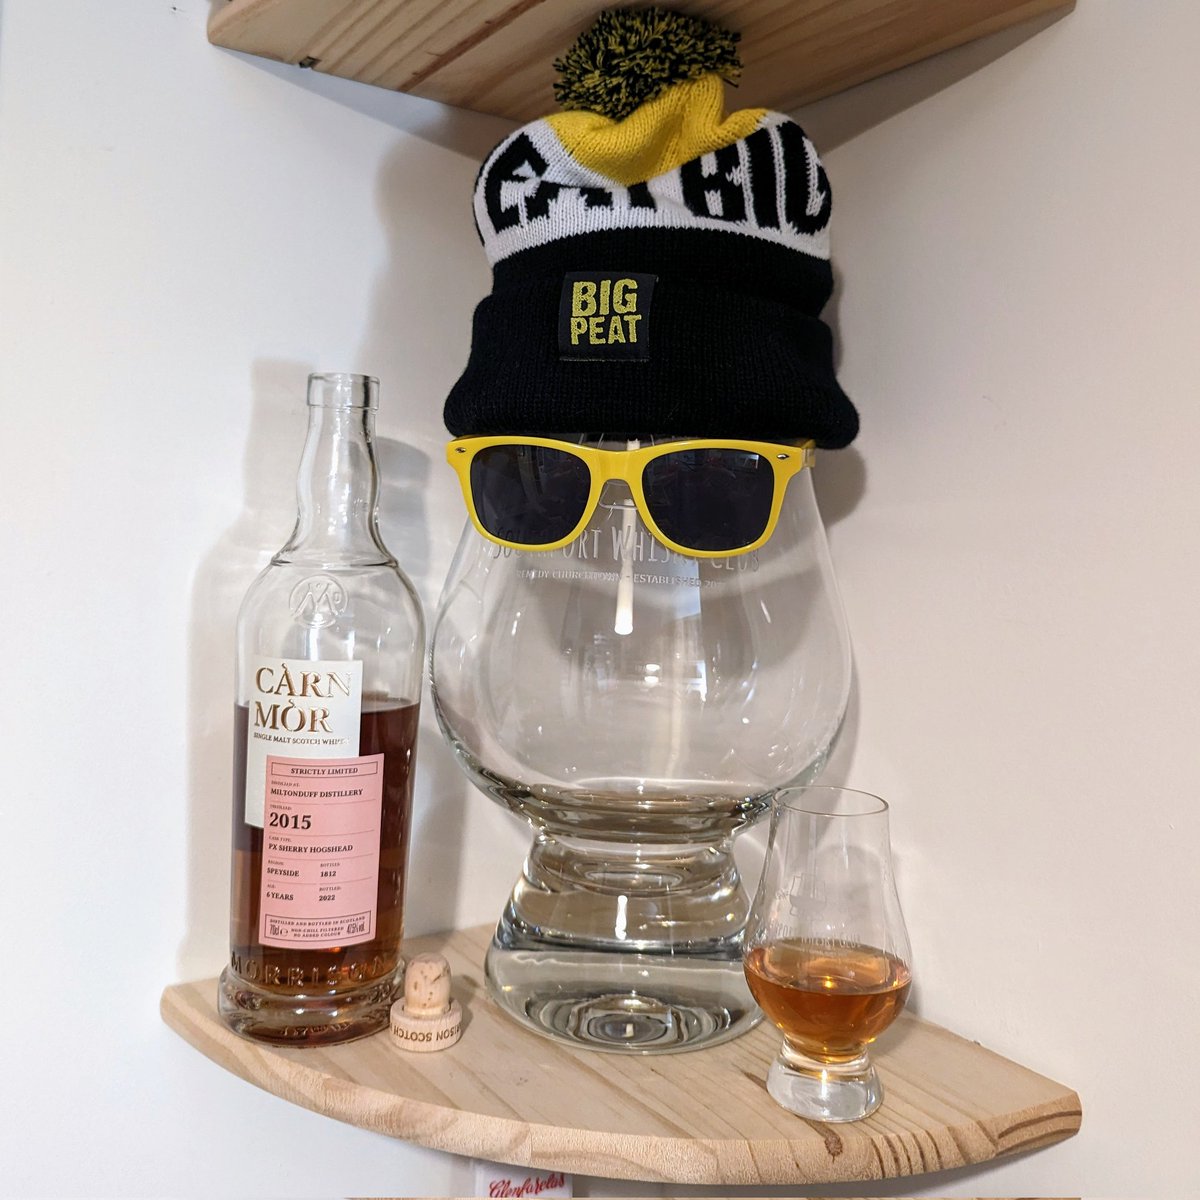 #MidnightFlangeClub here @BertSmedley with the #BigBoi @GlencairnGlass dressed for a trip skiing by the looks of it. 
No Peat here though just some sherry filth from @carnmorwhisky